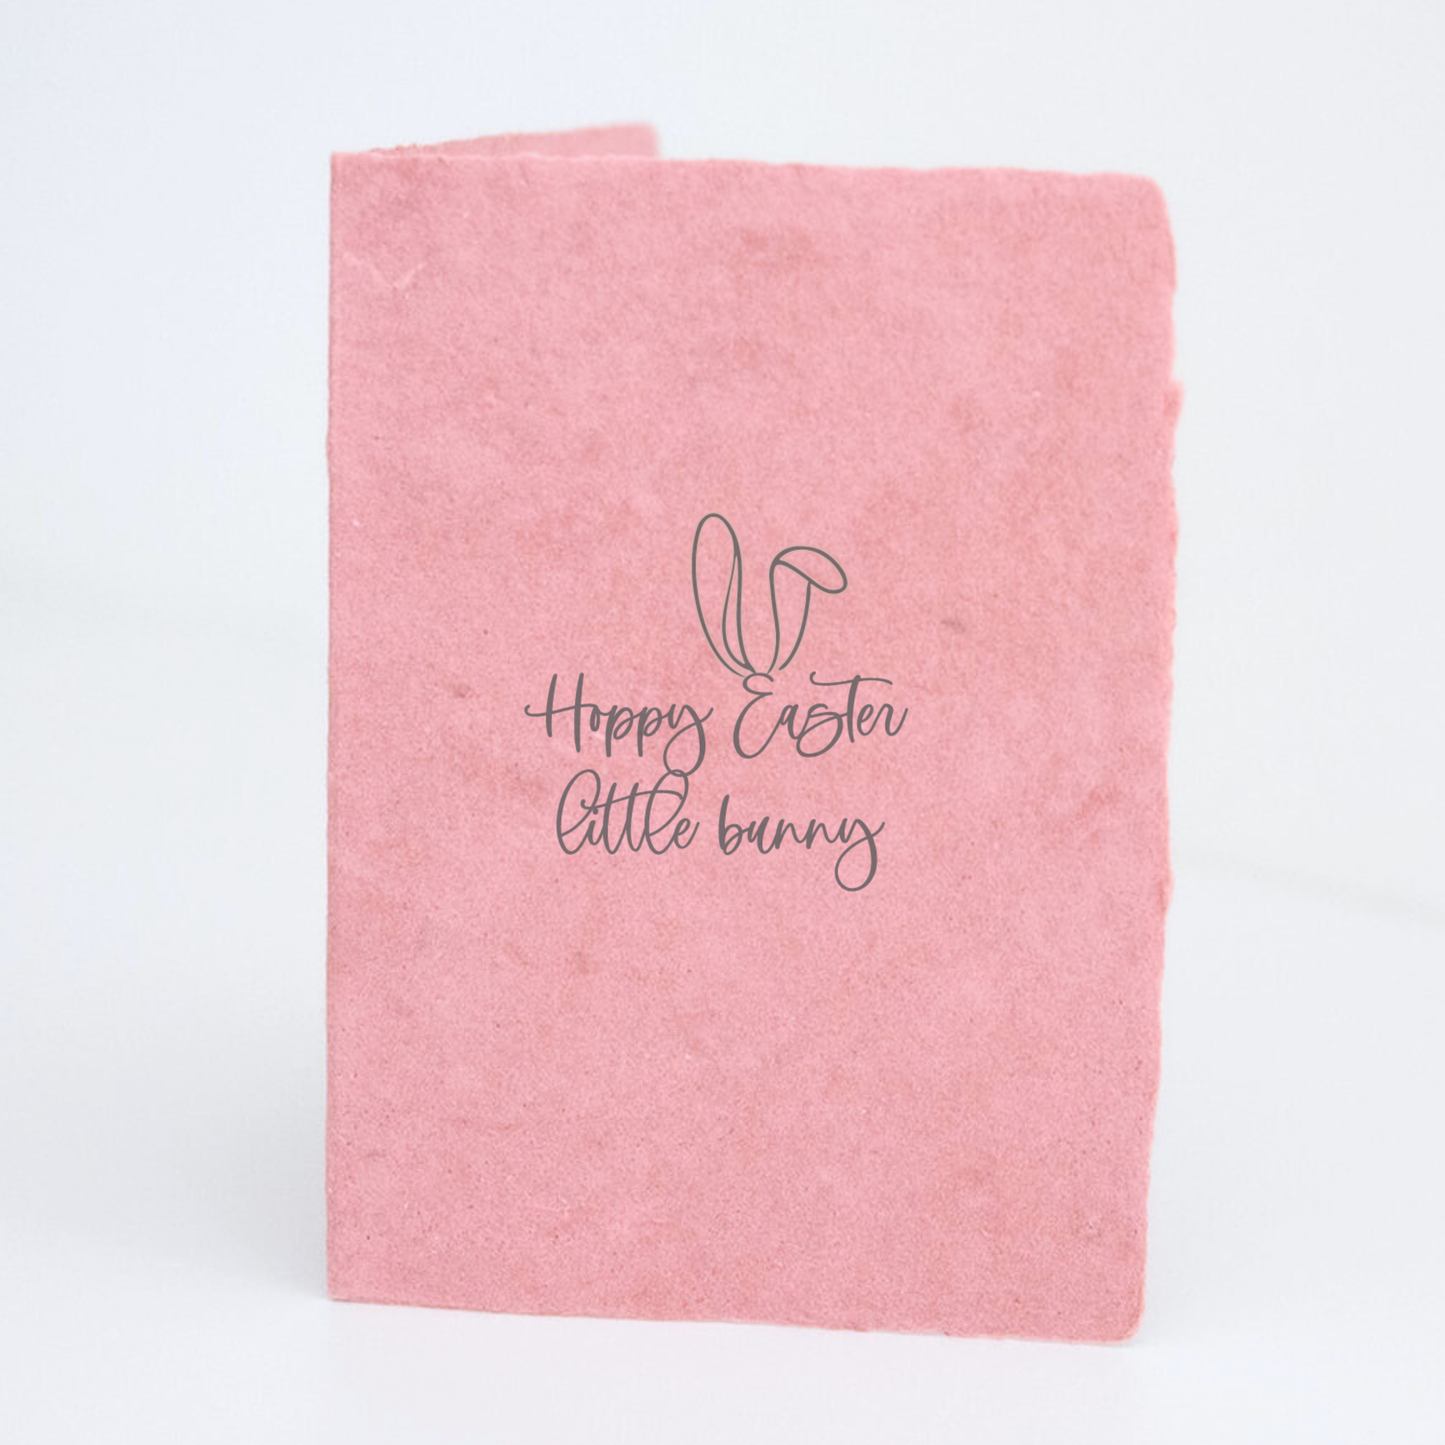 "Happy Easter Little Bunny" Easter Greeting Card